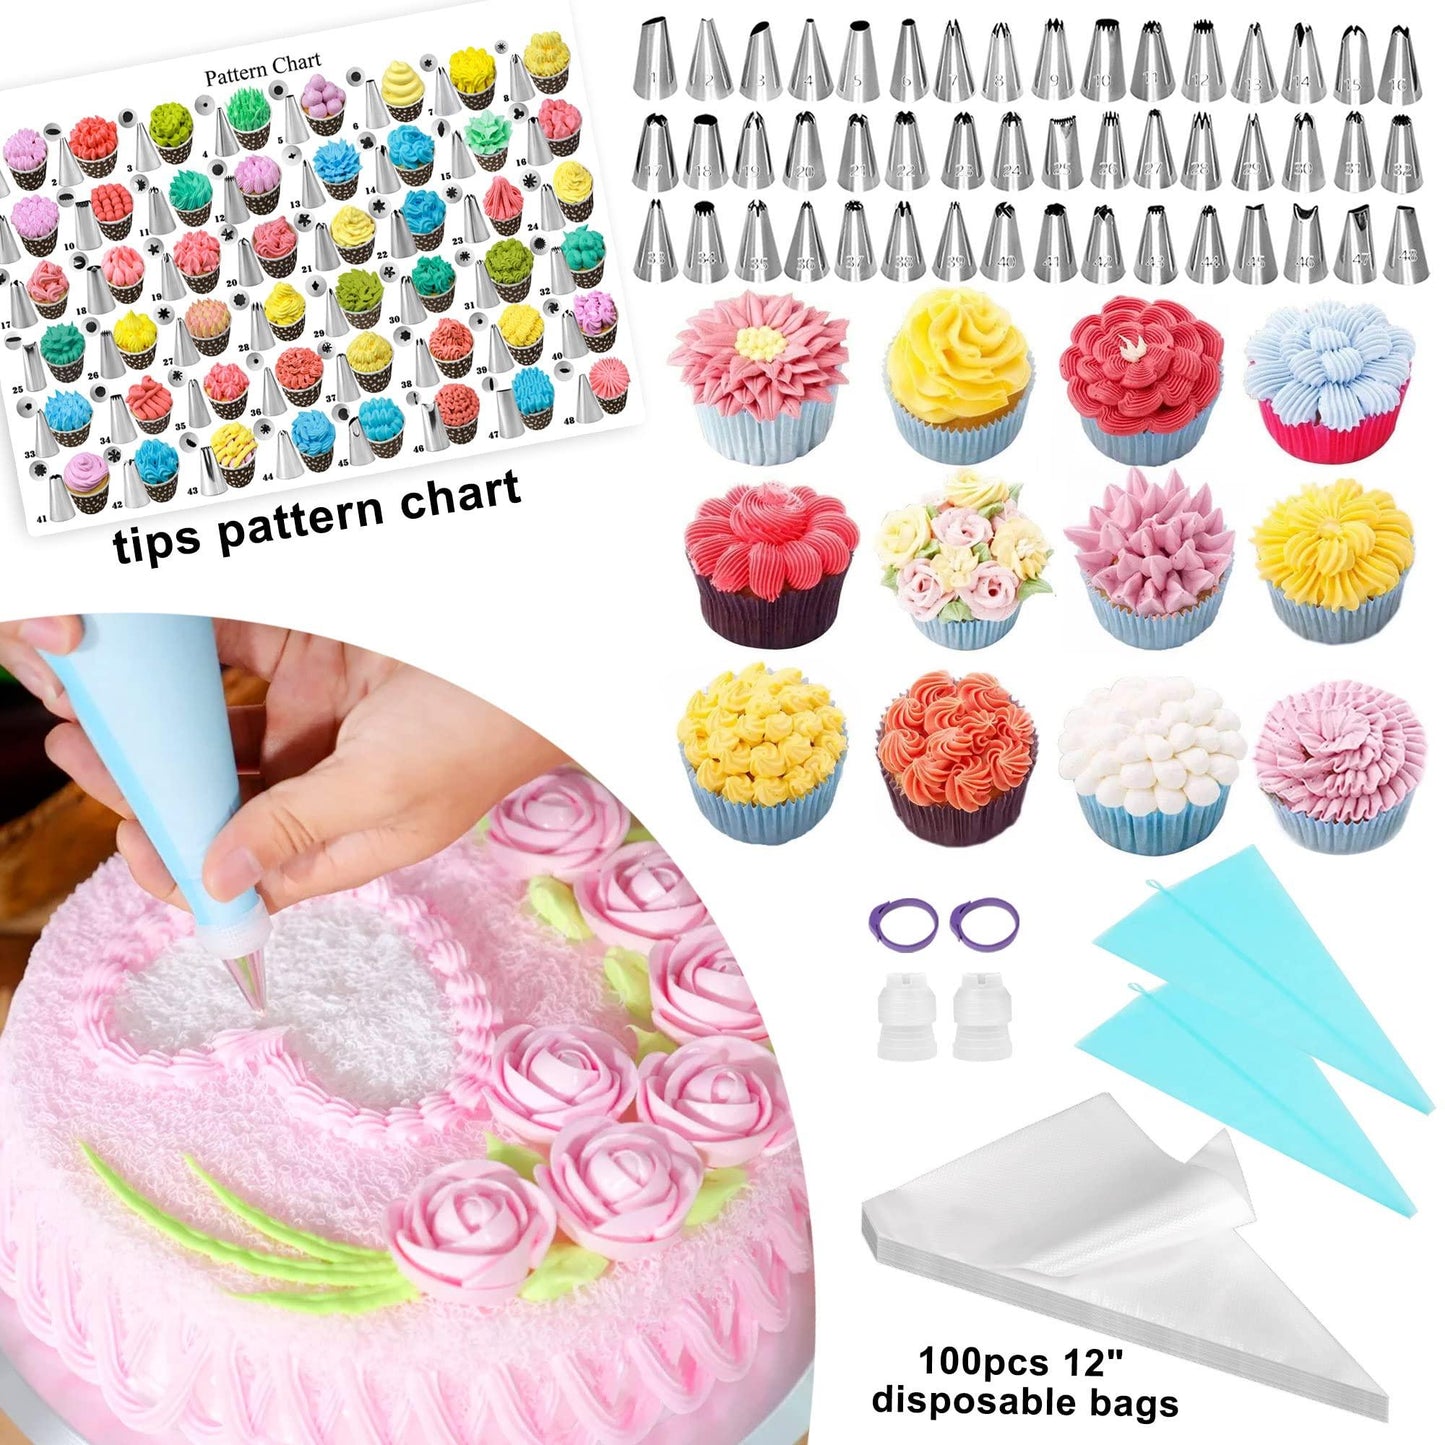 LotFancy Cake Decorating Kit, 469Pcs, Cake Baking Supplies with Rotating Turntable, Springform Pans, Piping Bags and Tips Set, Icing Spatula, Baking Tools Set for Beginners and Cake Lovers - CookCave